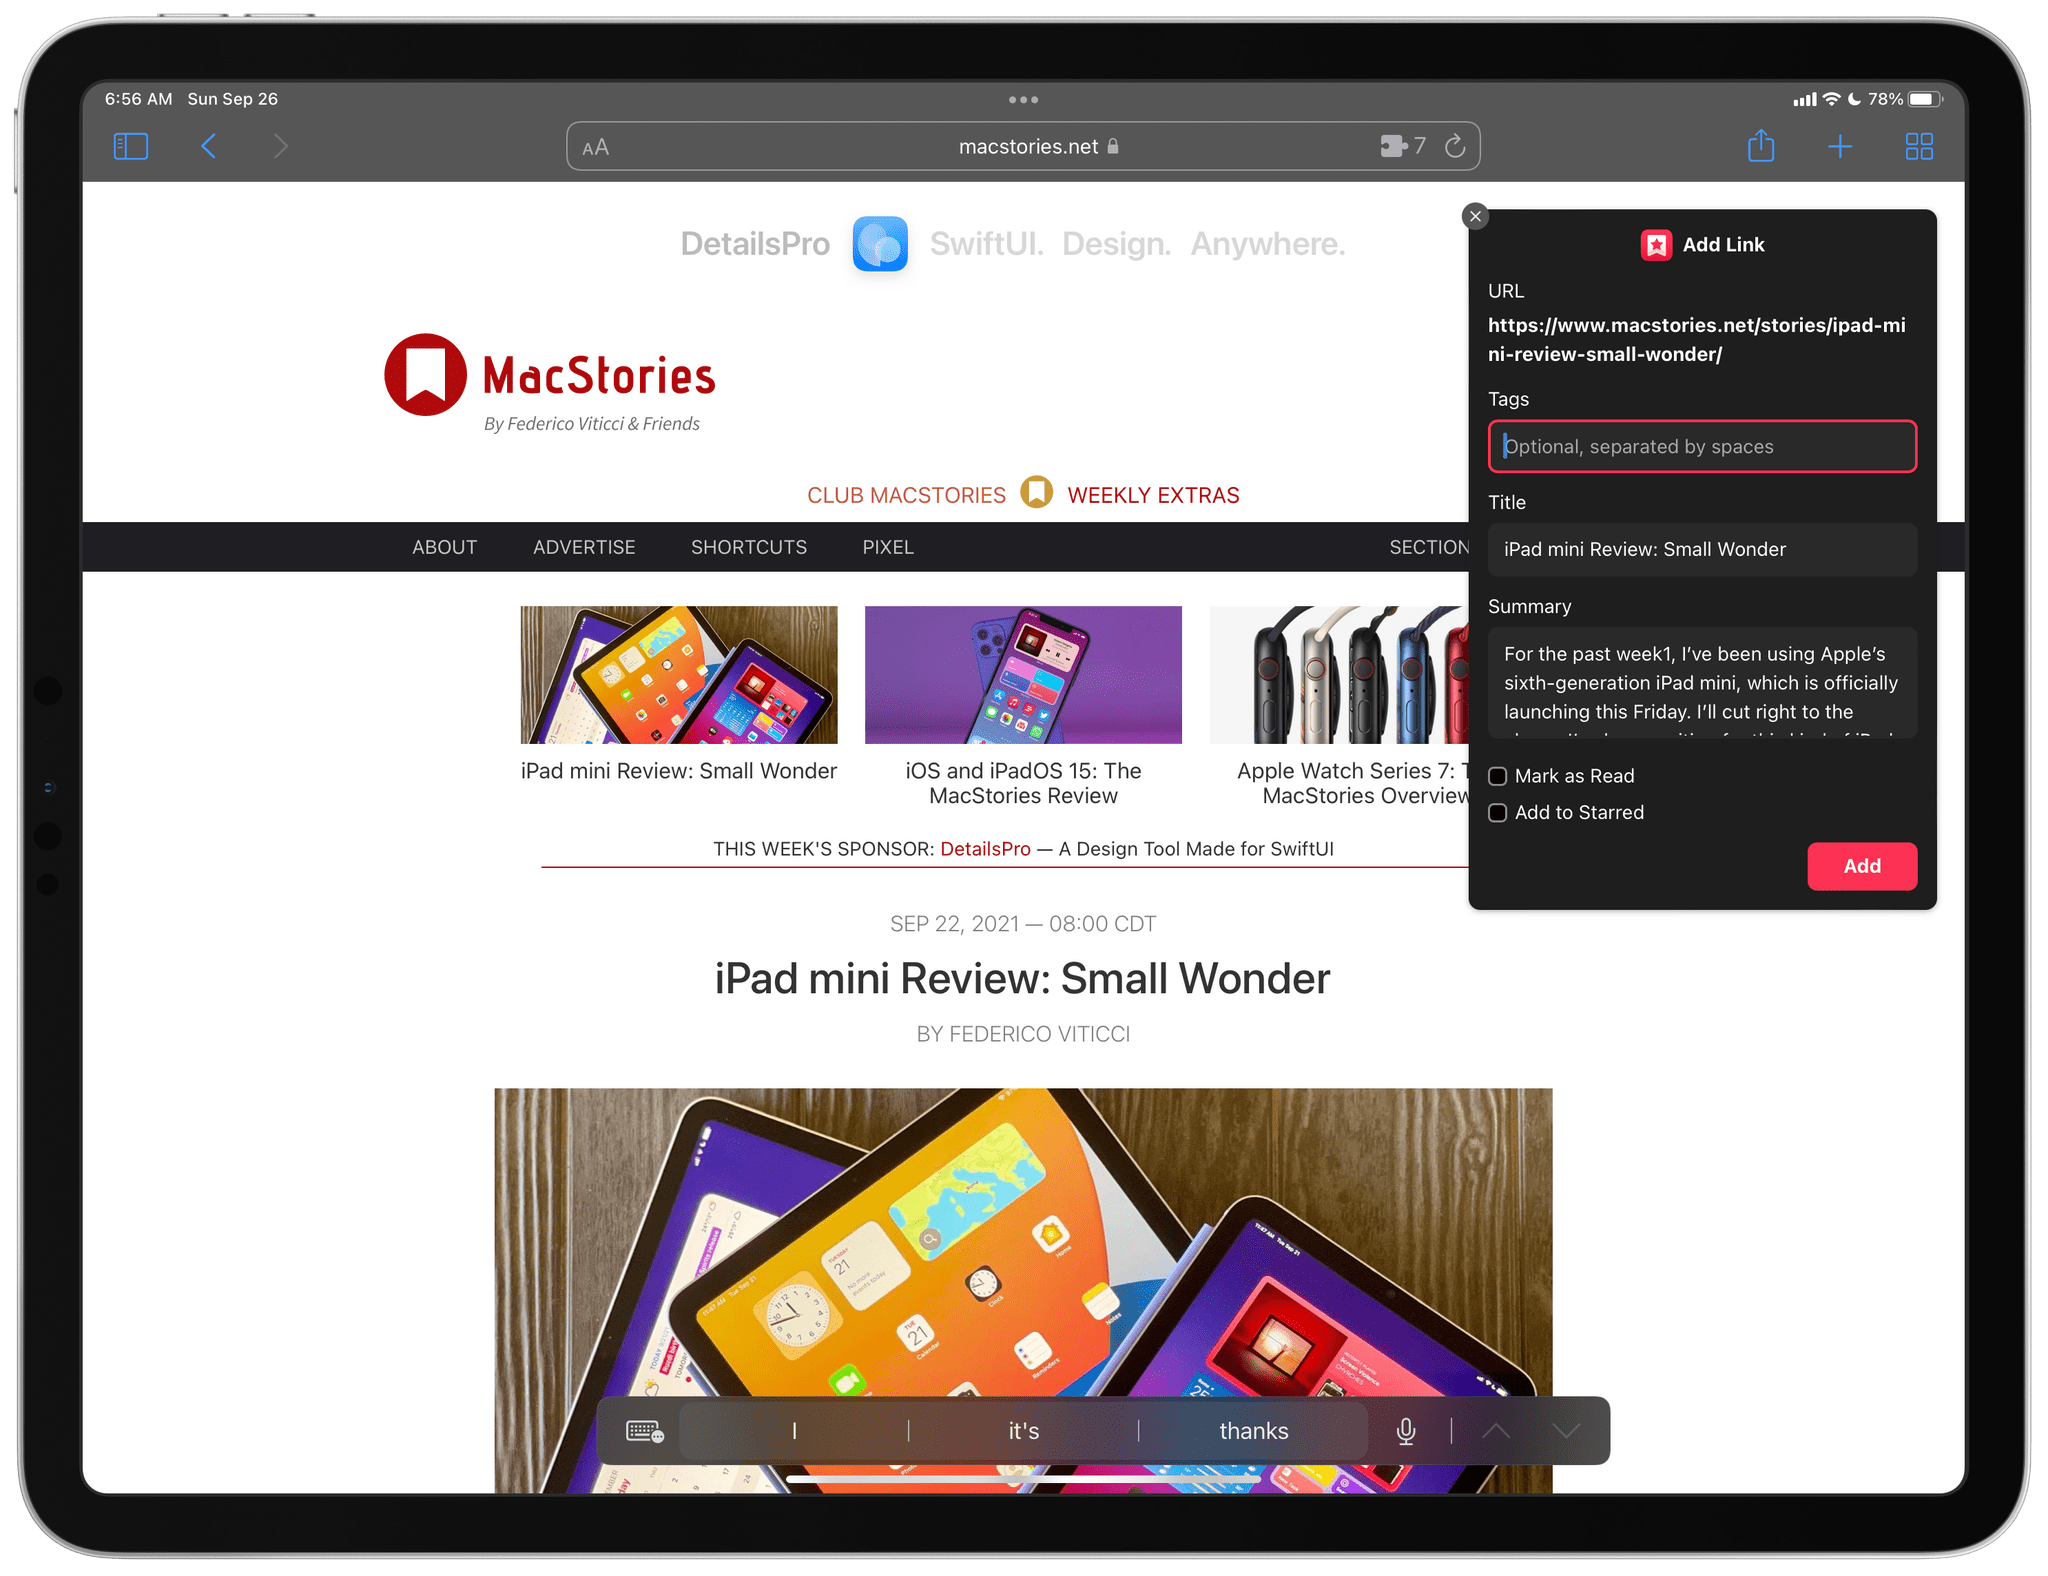 safari extension to speed up videos